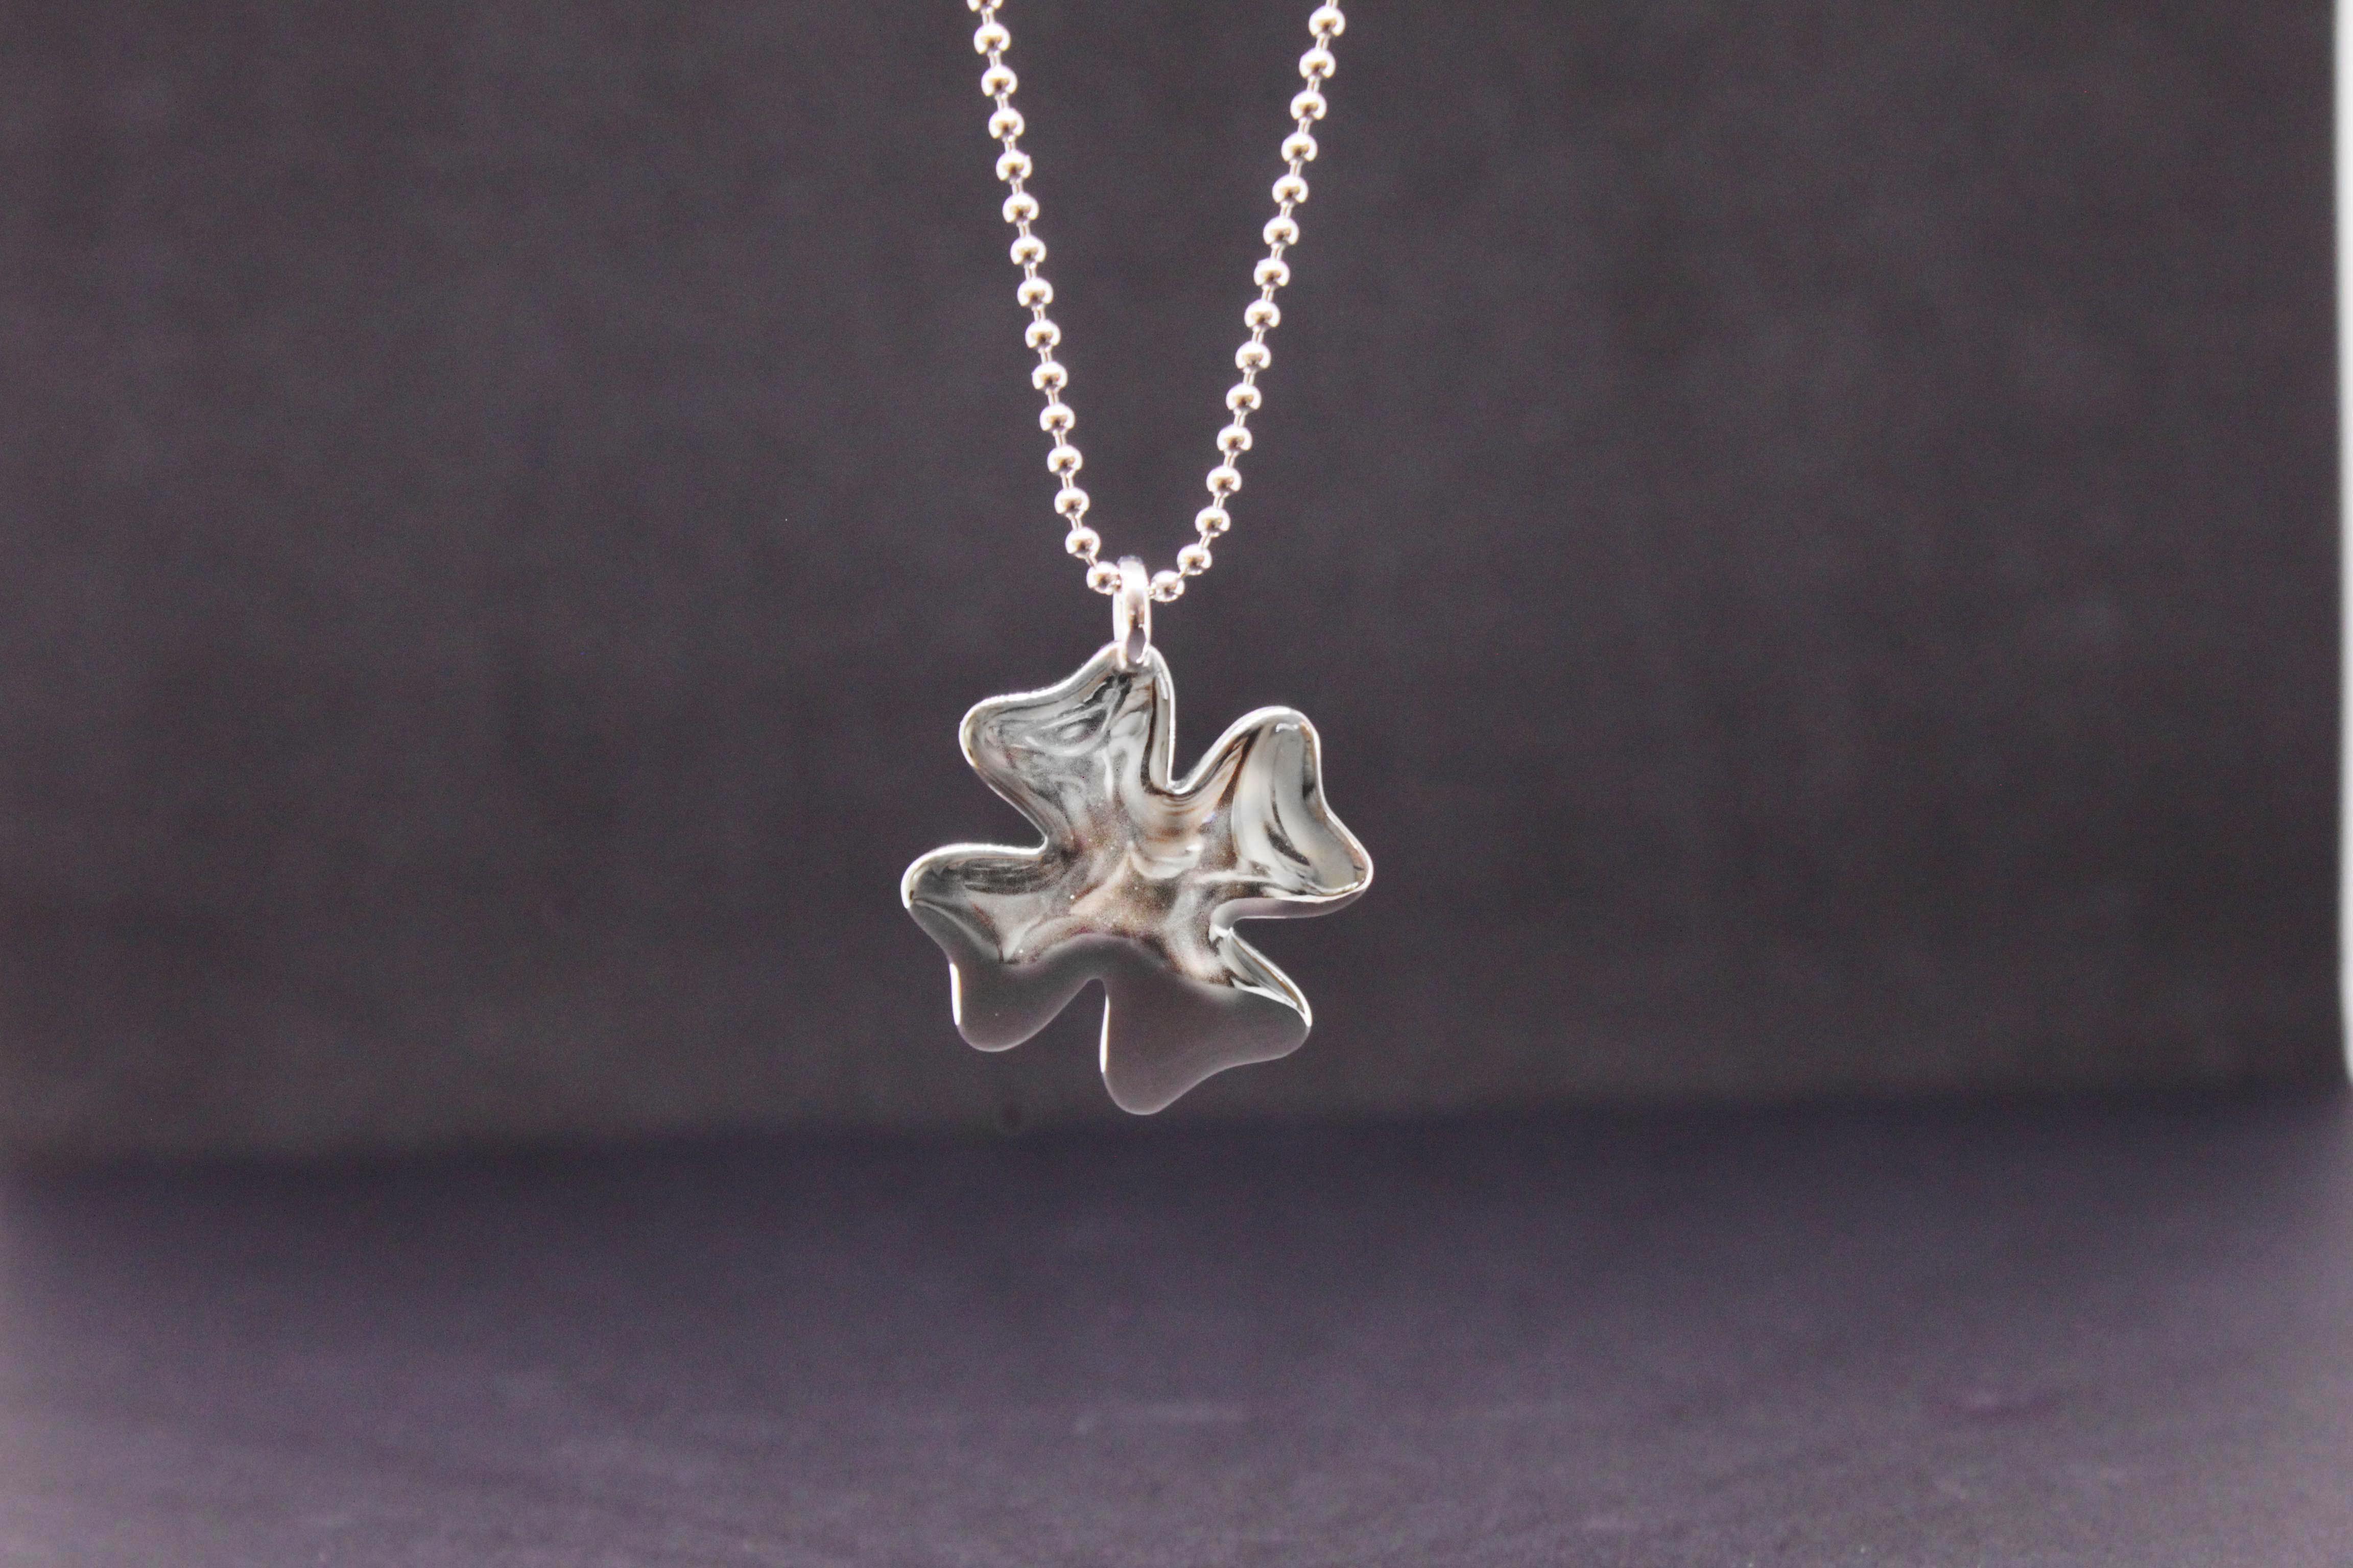 Silver four-leaf clover pendant with long necklace